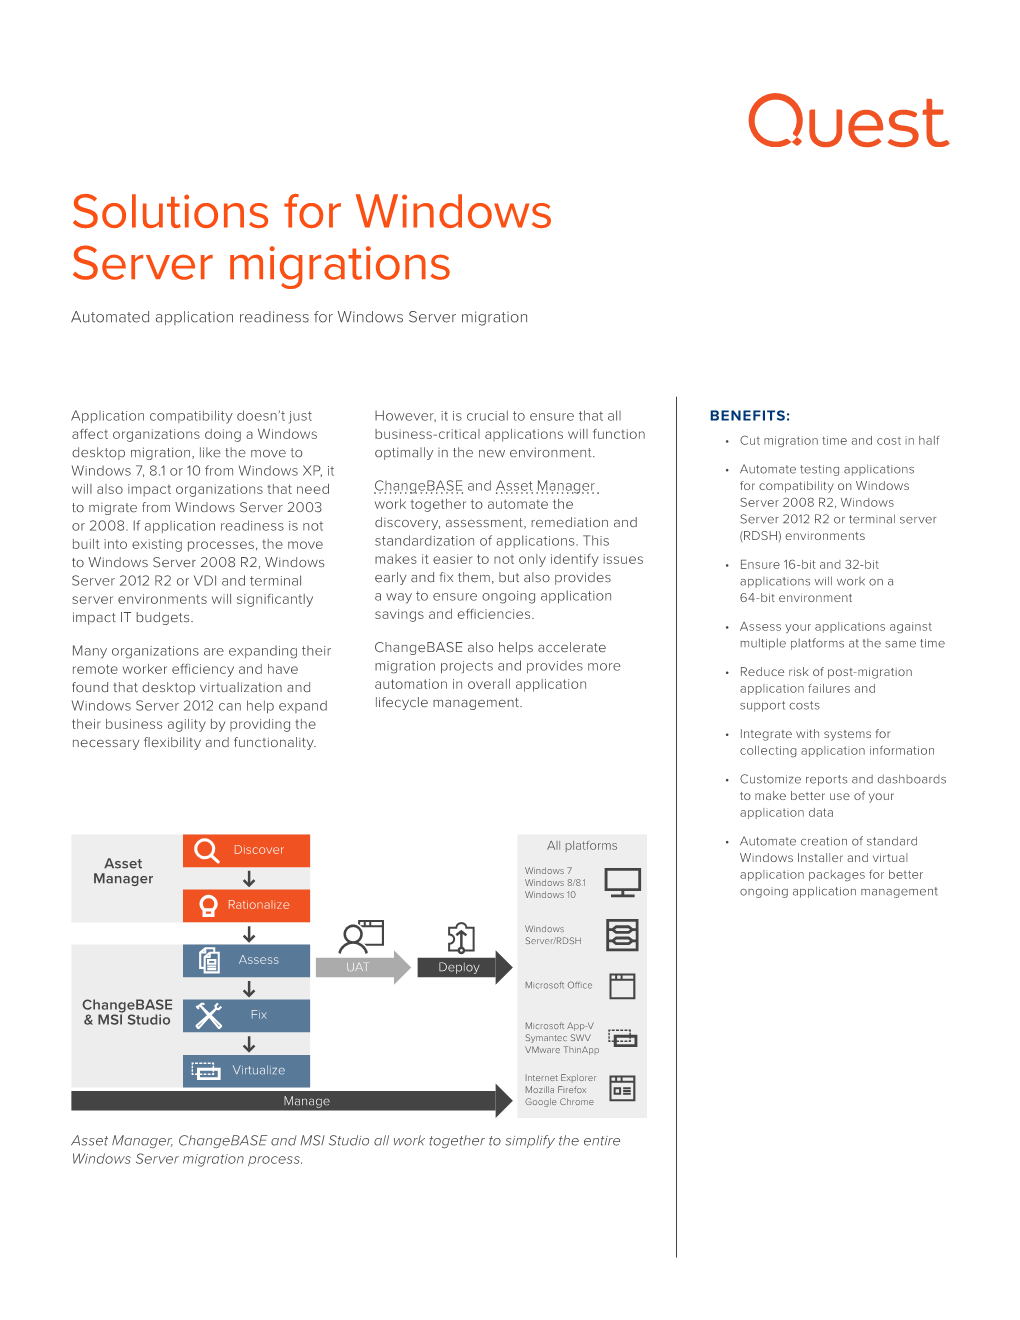 Solutions for Windows Server Migrations Automated Application Readiness for Windows Server Migration